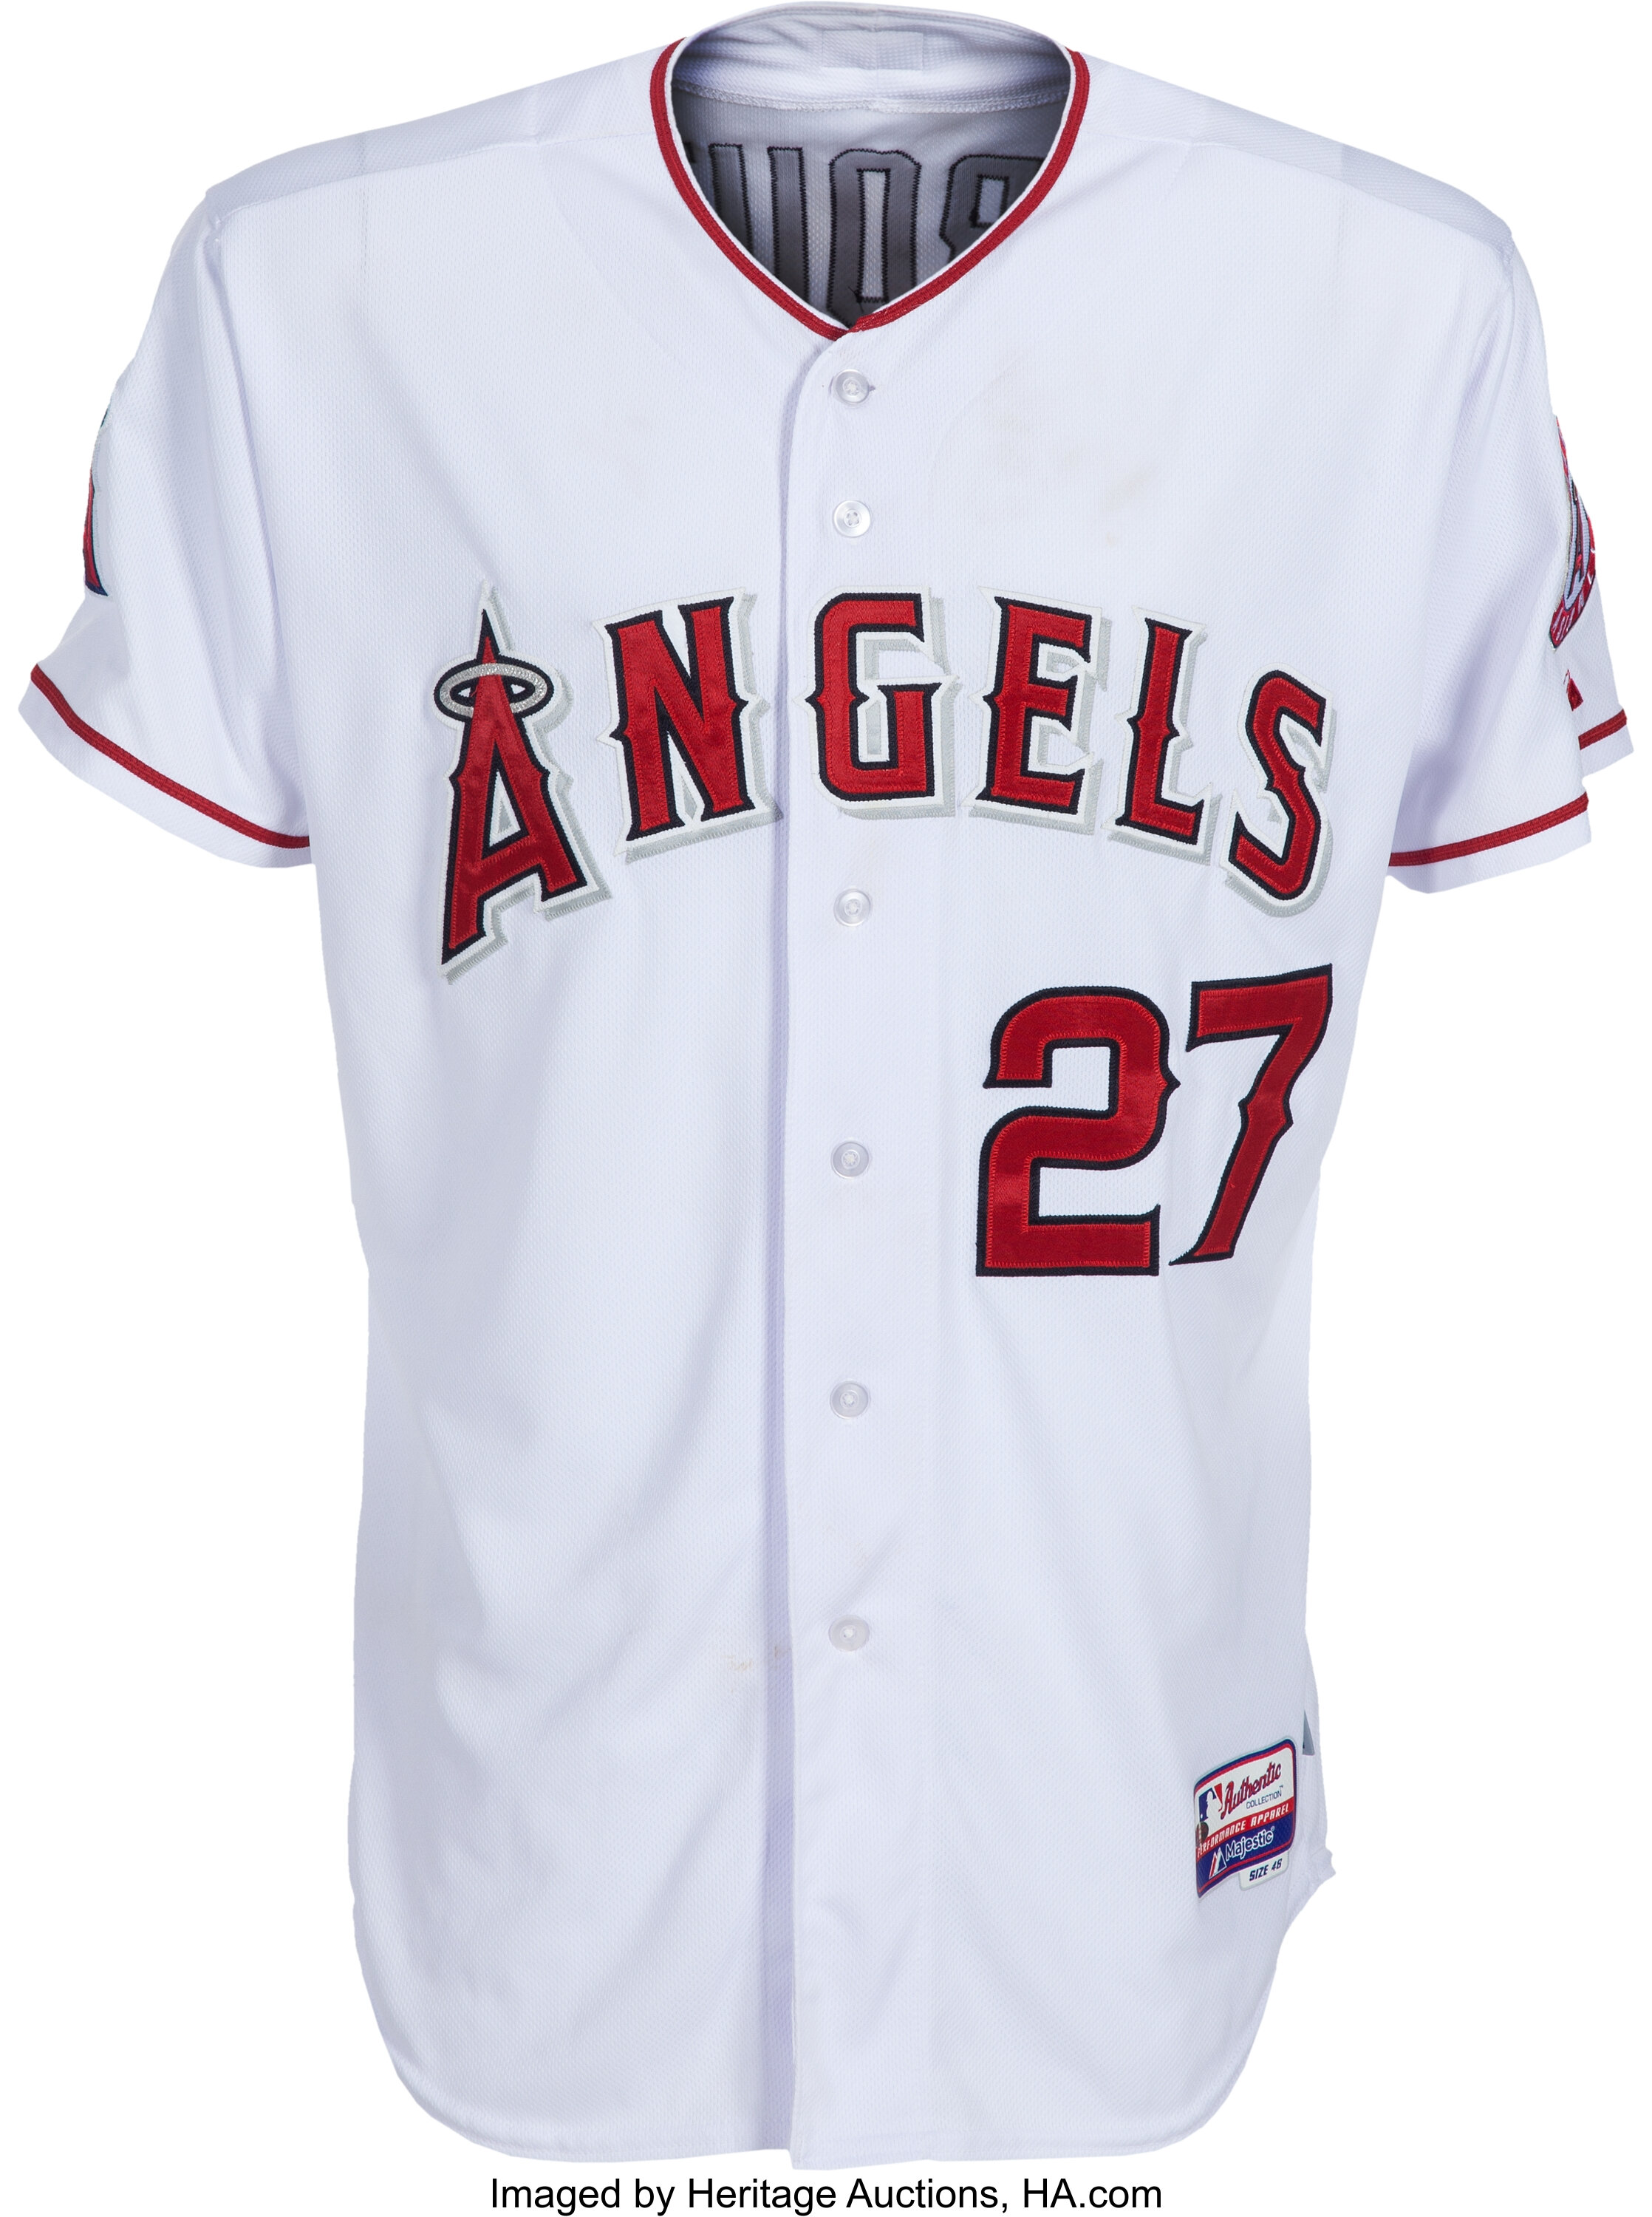 Angels Authentics: Mike Trout 2014 Opening Day Game-Used Jersey